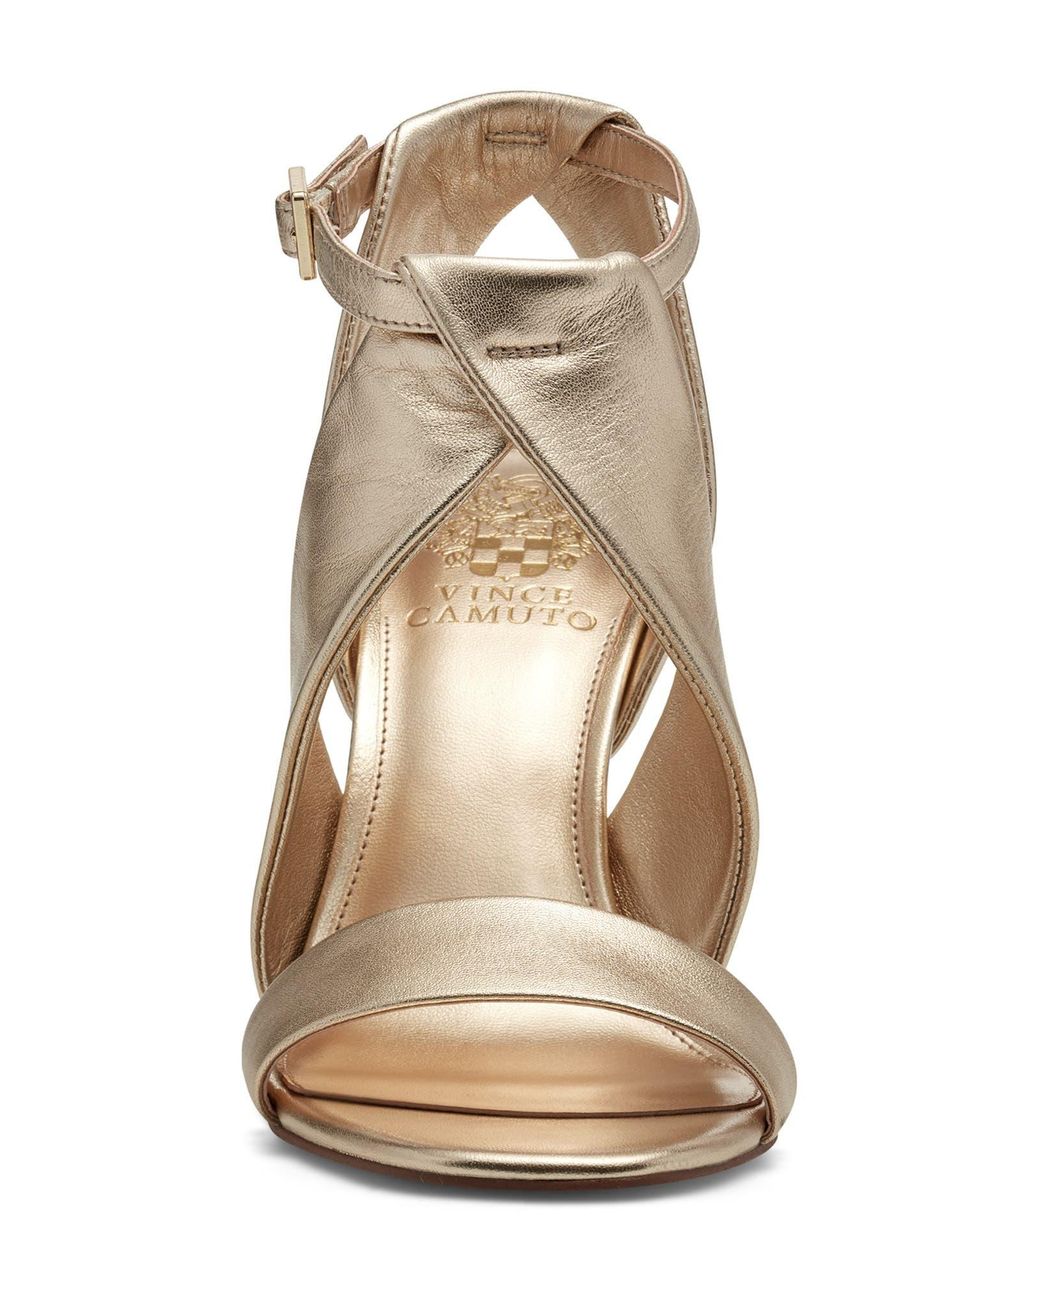 Vince Camuto Kalintie Spike Sandal in Natural | Lyst